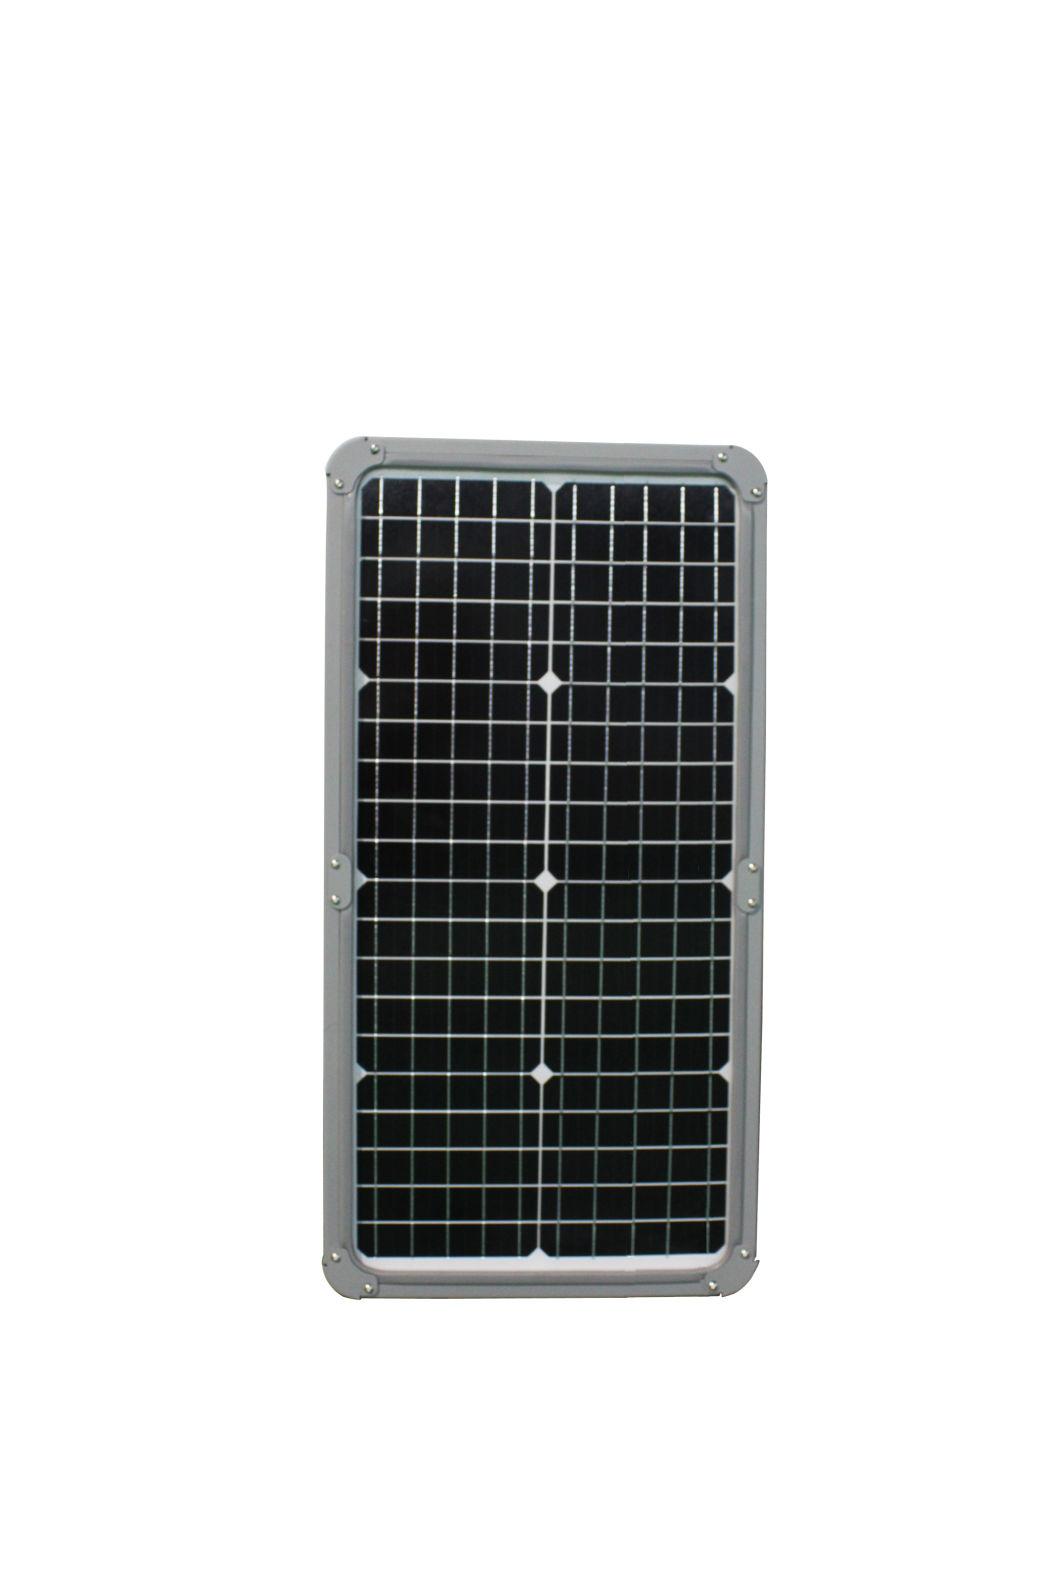 Manufacturer of All in One Solar Street Light High Power LED Outdoor 50W 60W